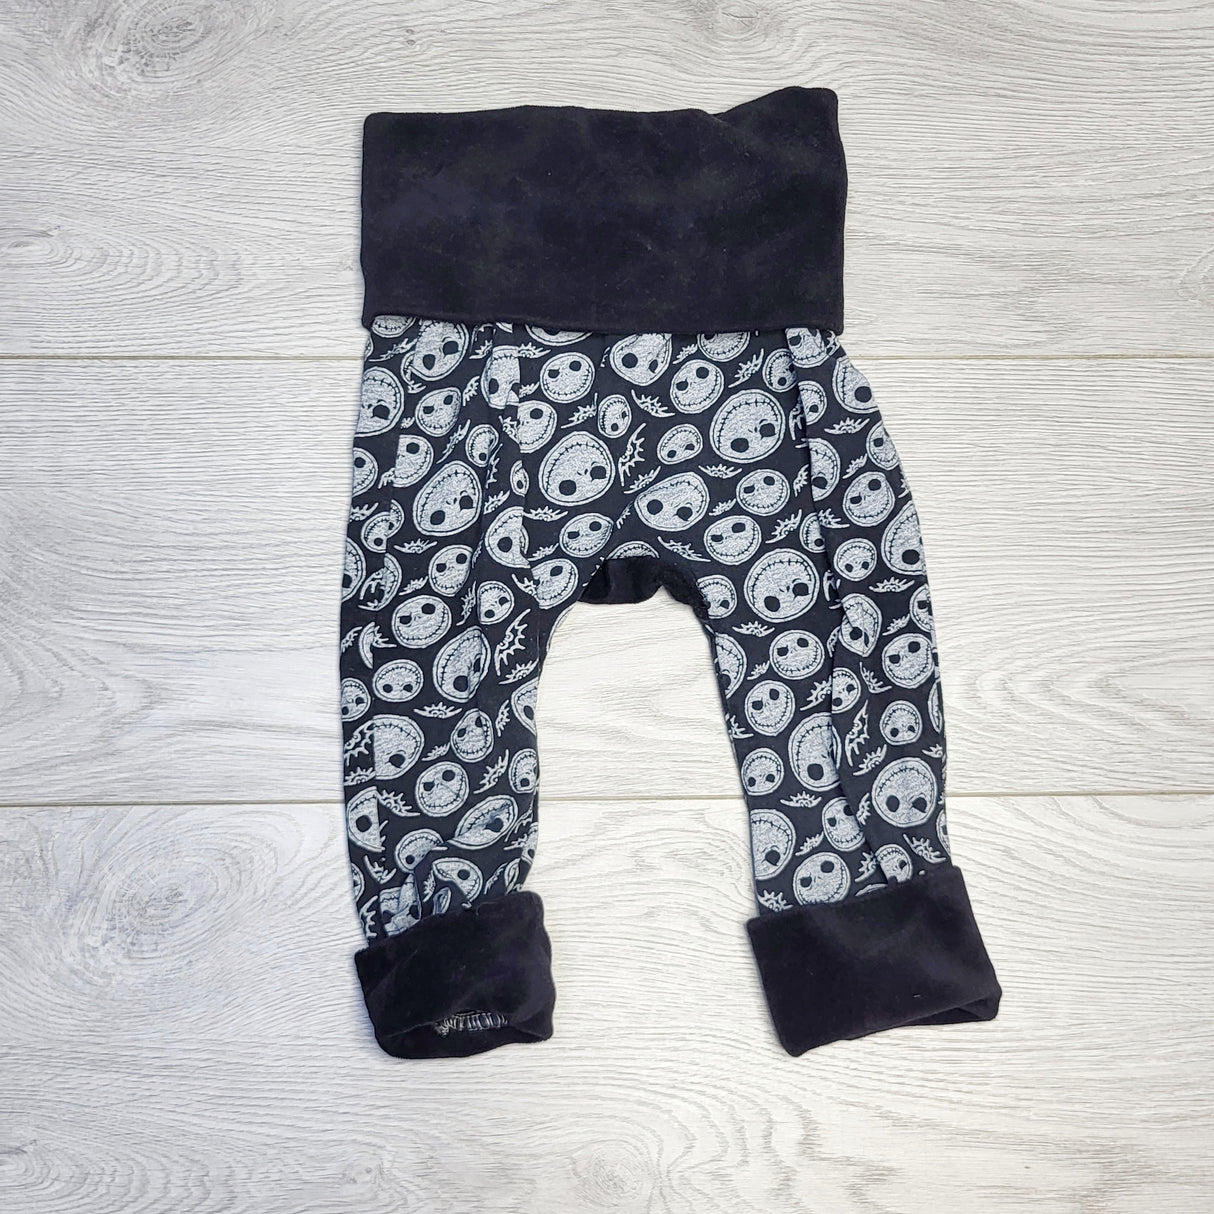 MIRE1 - Handmade The Nightmare Before Christmas pants, approx size 6 months to 2T